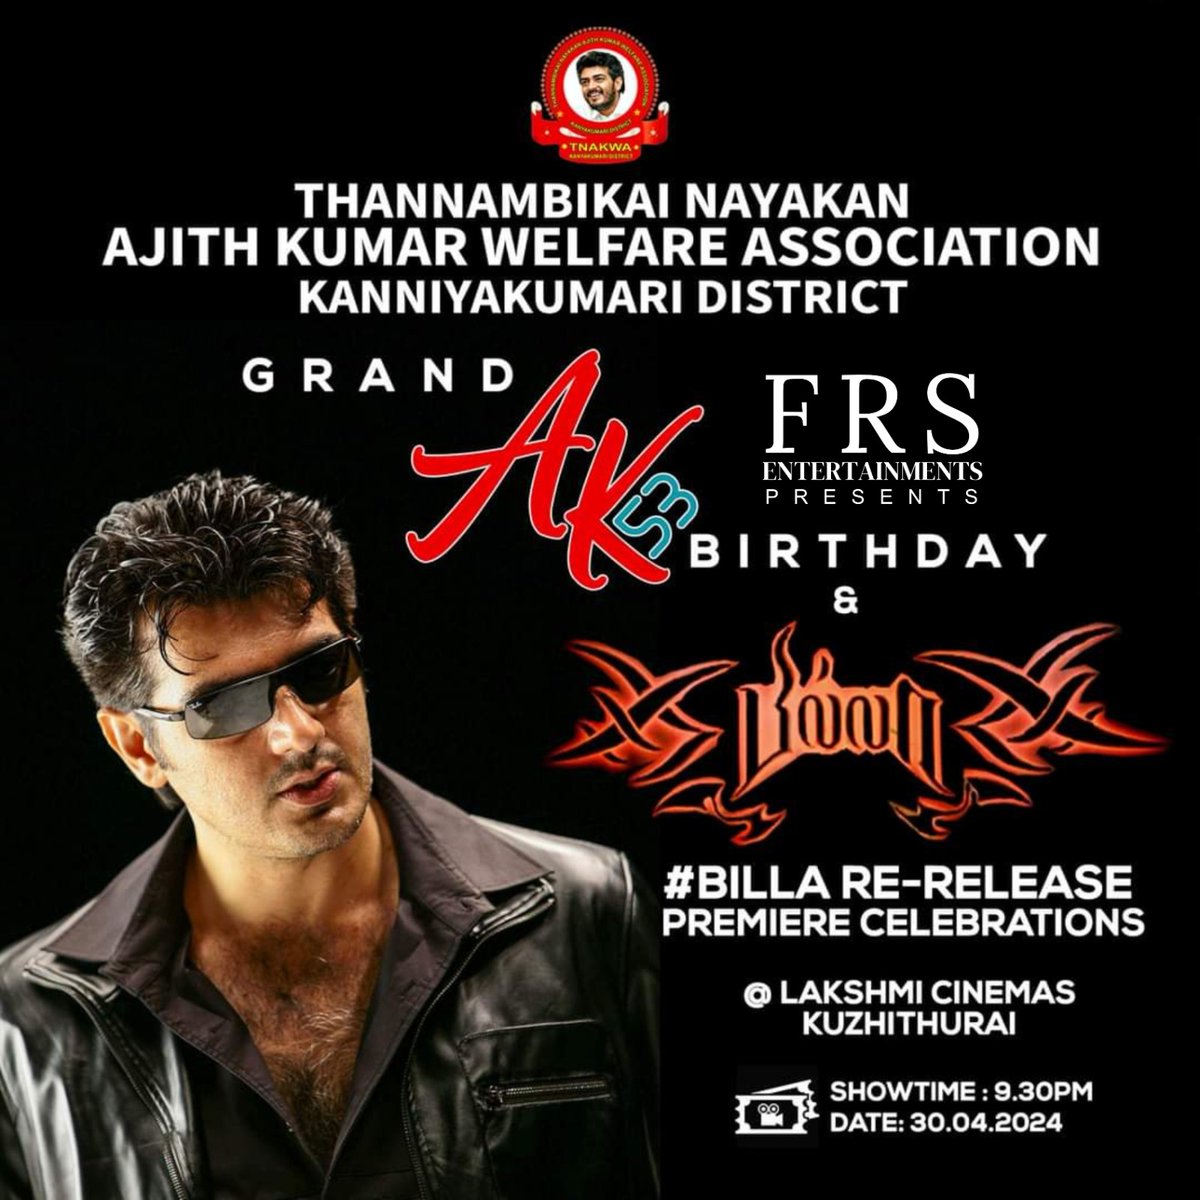 Celebration of Kanyakumari AK Fans Club. #Billa SPECIAL SHOW AT 9.30 PM ON 30.4.2024 AT LAKSHMI CINEMAS

Happy and proud to
Re-Release of #Ak 's Most Successful film #Billa under #FRSEntertainments in Tk Area. #FansTreat
 
@i_umar_farook @atmproductions5
@frs_entertainme